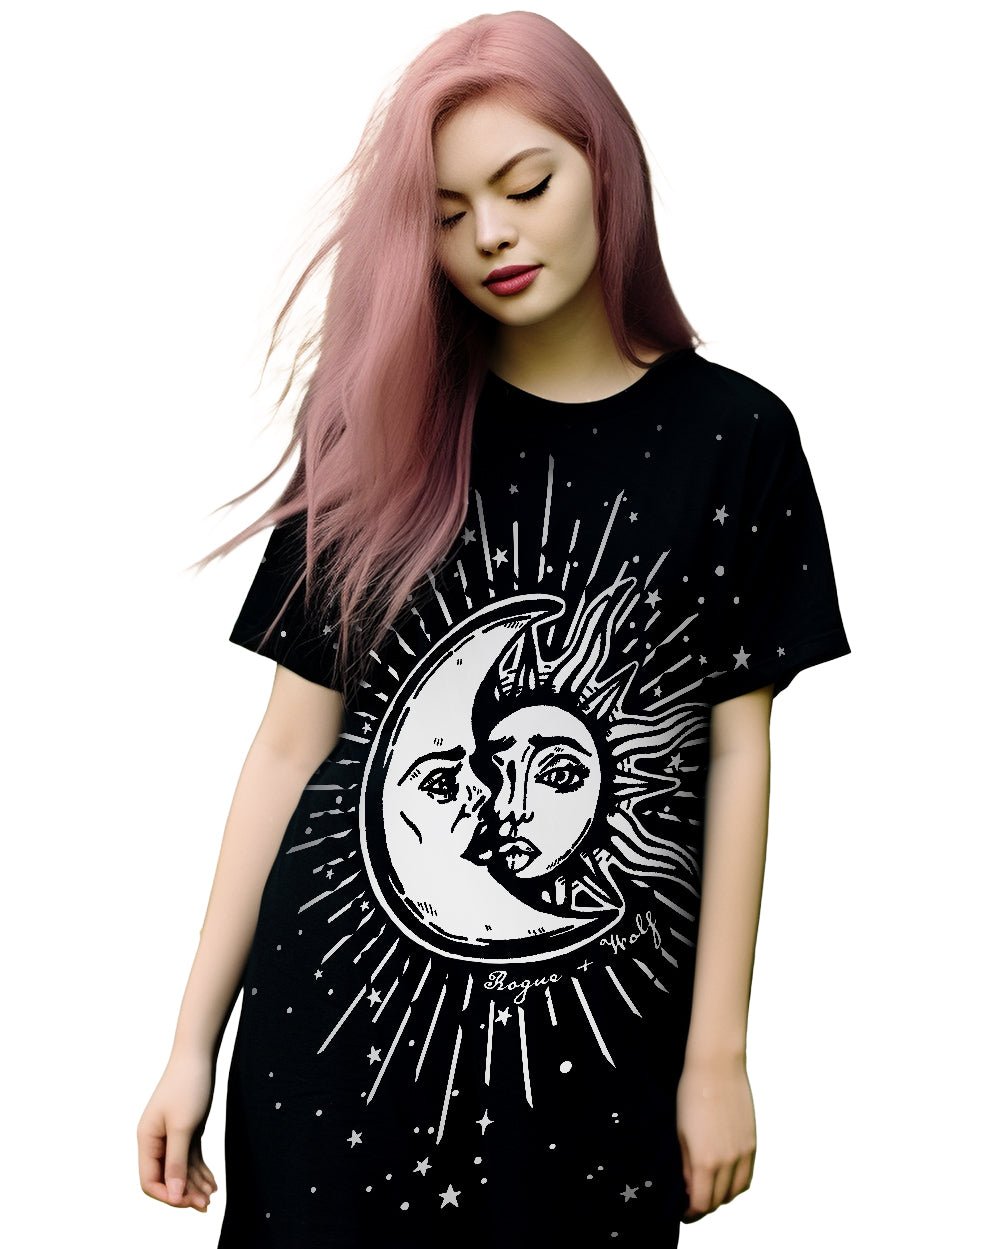 Astral Tee Dress - Vegan Gothic Clothing - Alternative Occult Ethical Fashion - On Demand Eco-friendly Sustainable Product